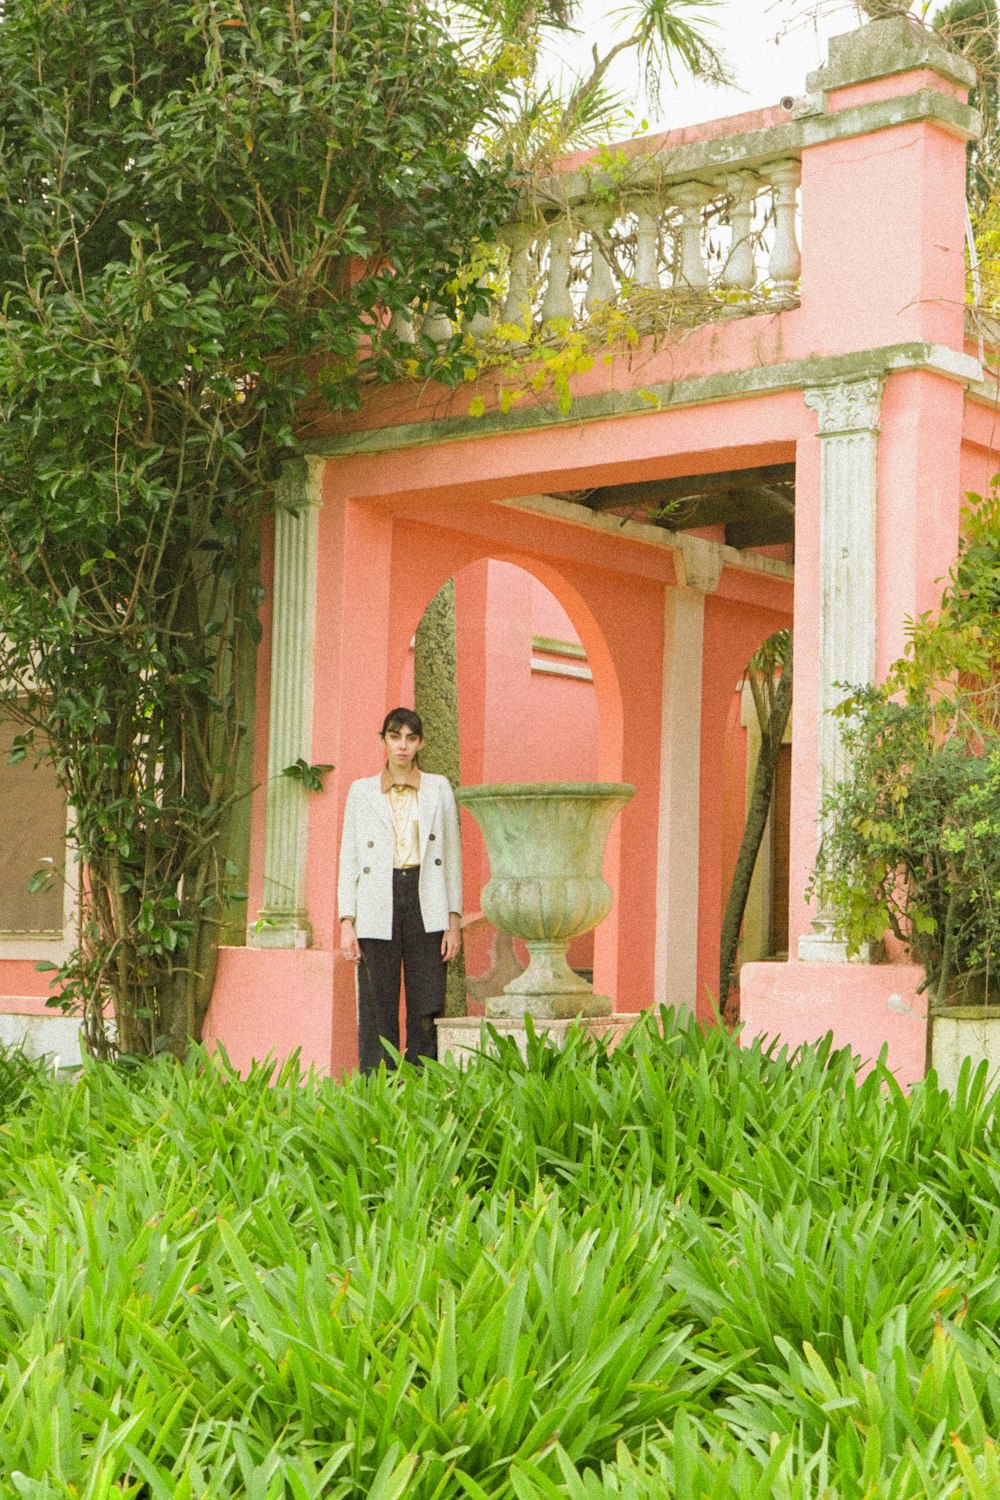 a woman standing in front of a pink building